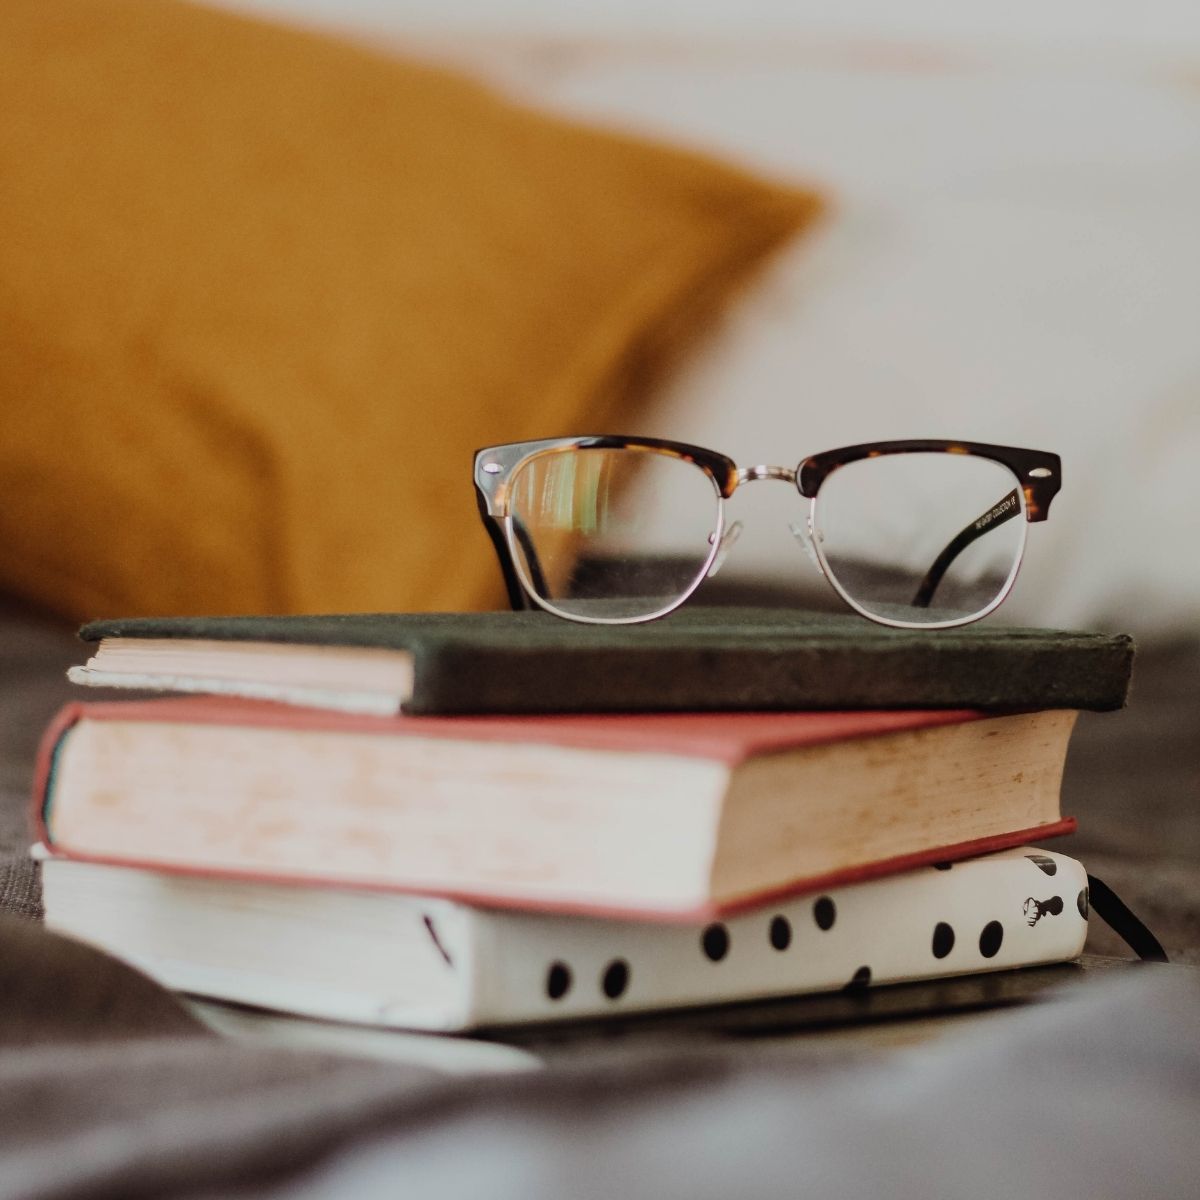 A stack of books with a pair of glasses on top.